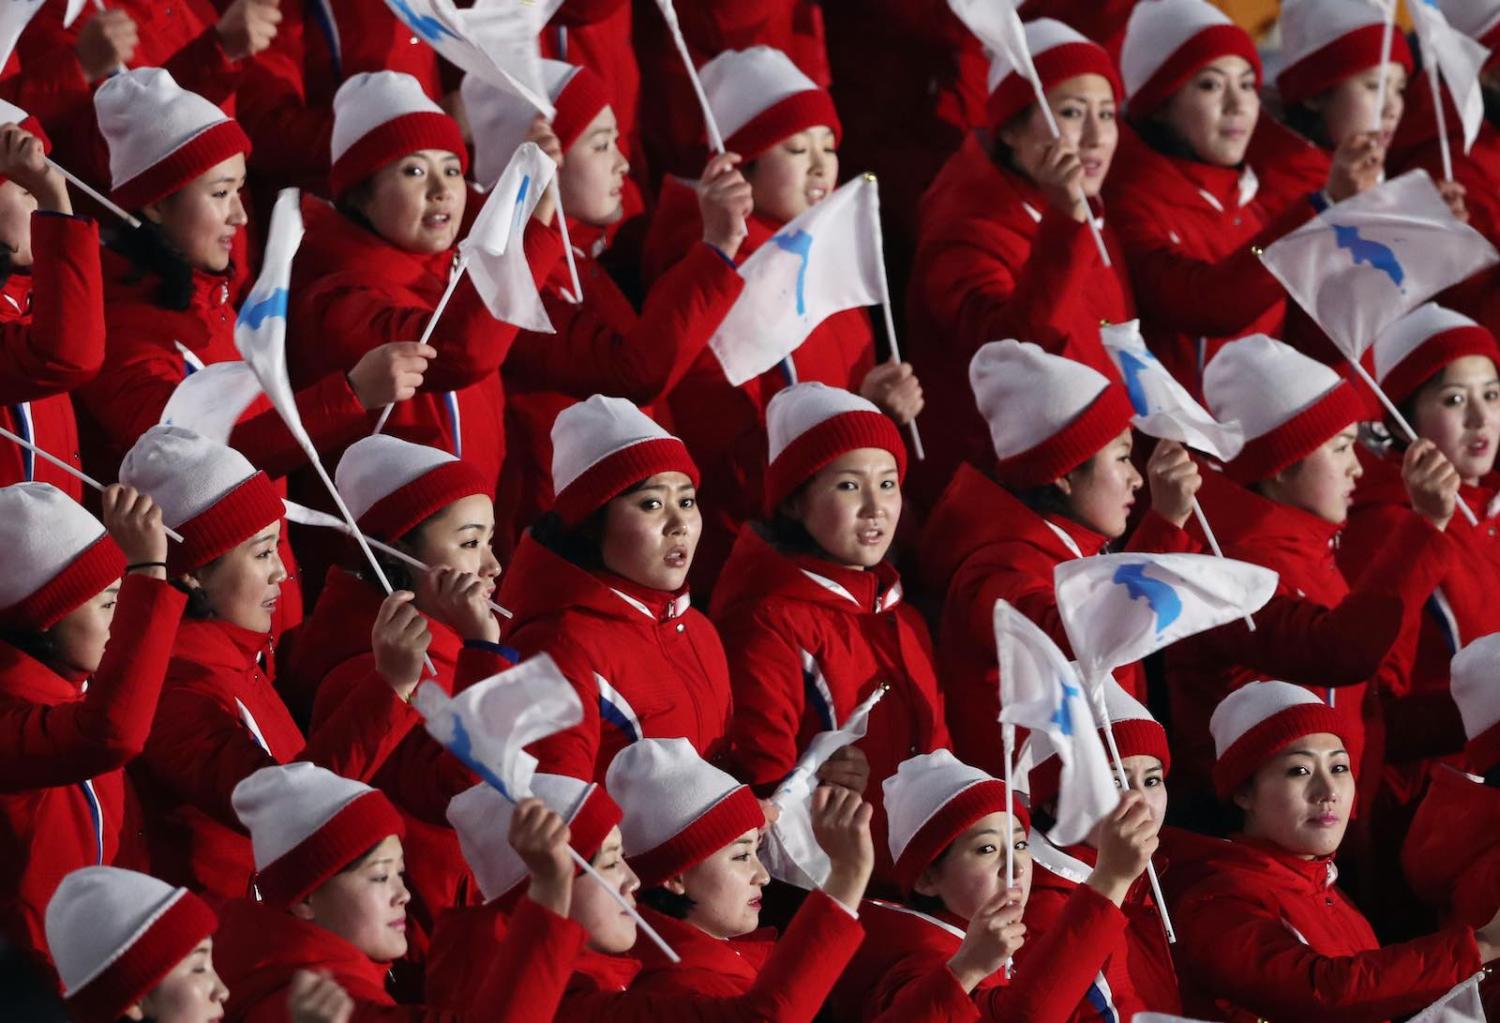 North Korean cheerleaders at the opening ceremony of the 2018 Winter Olympic Games, 9 February 2018 in Pyeongchang-gun, South Korea (Ian MacNicol/Getty Images)